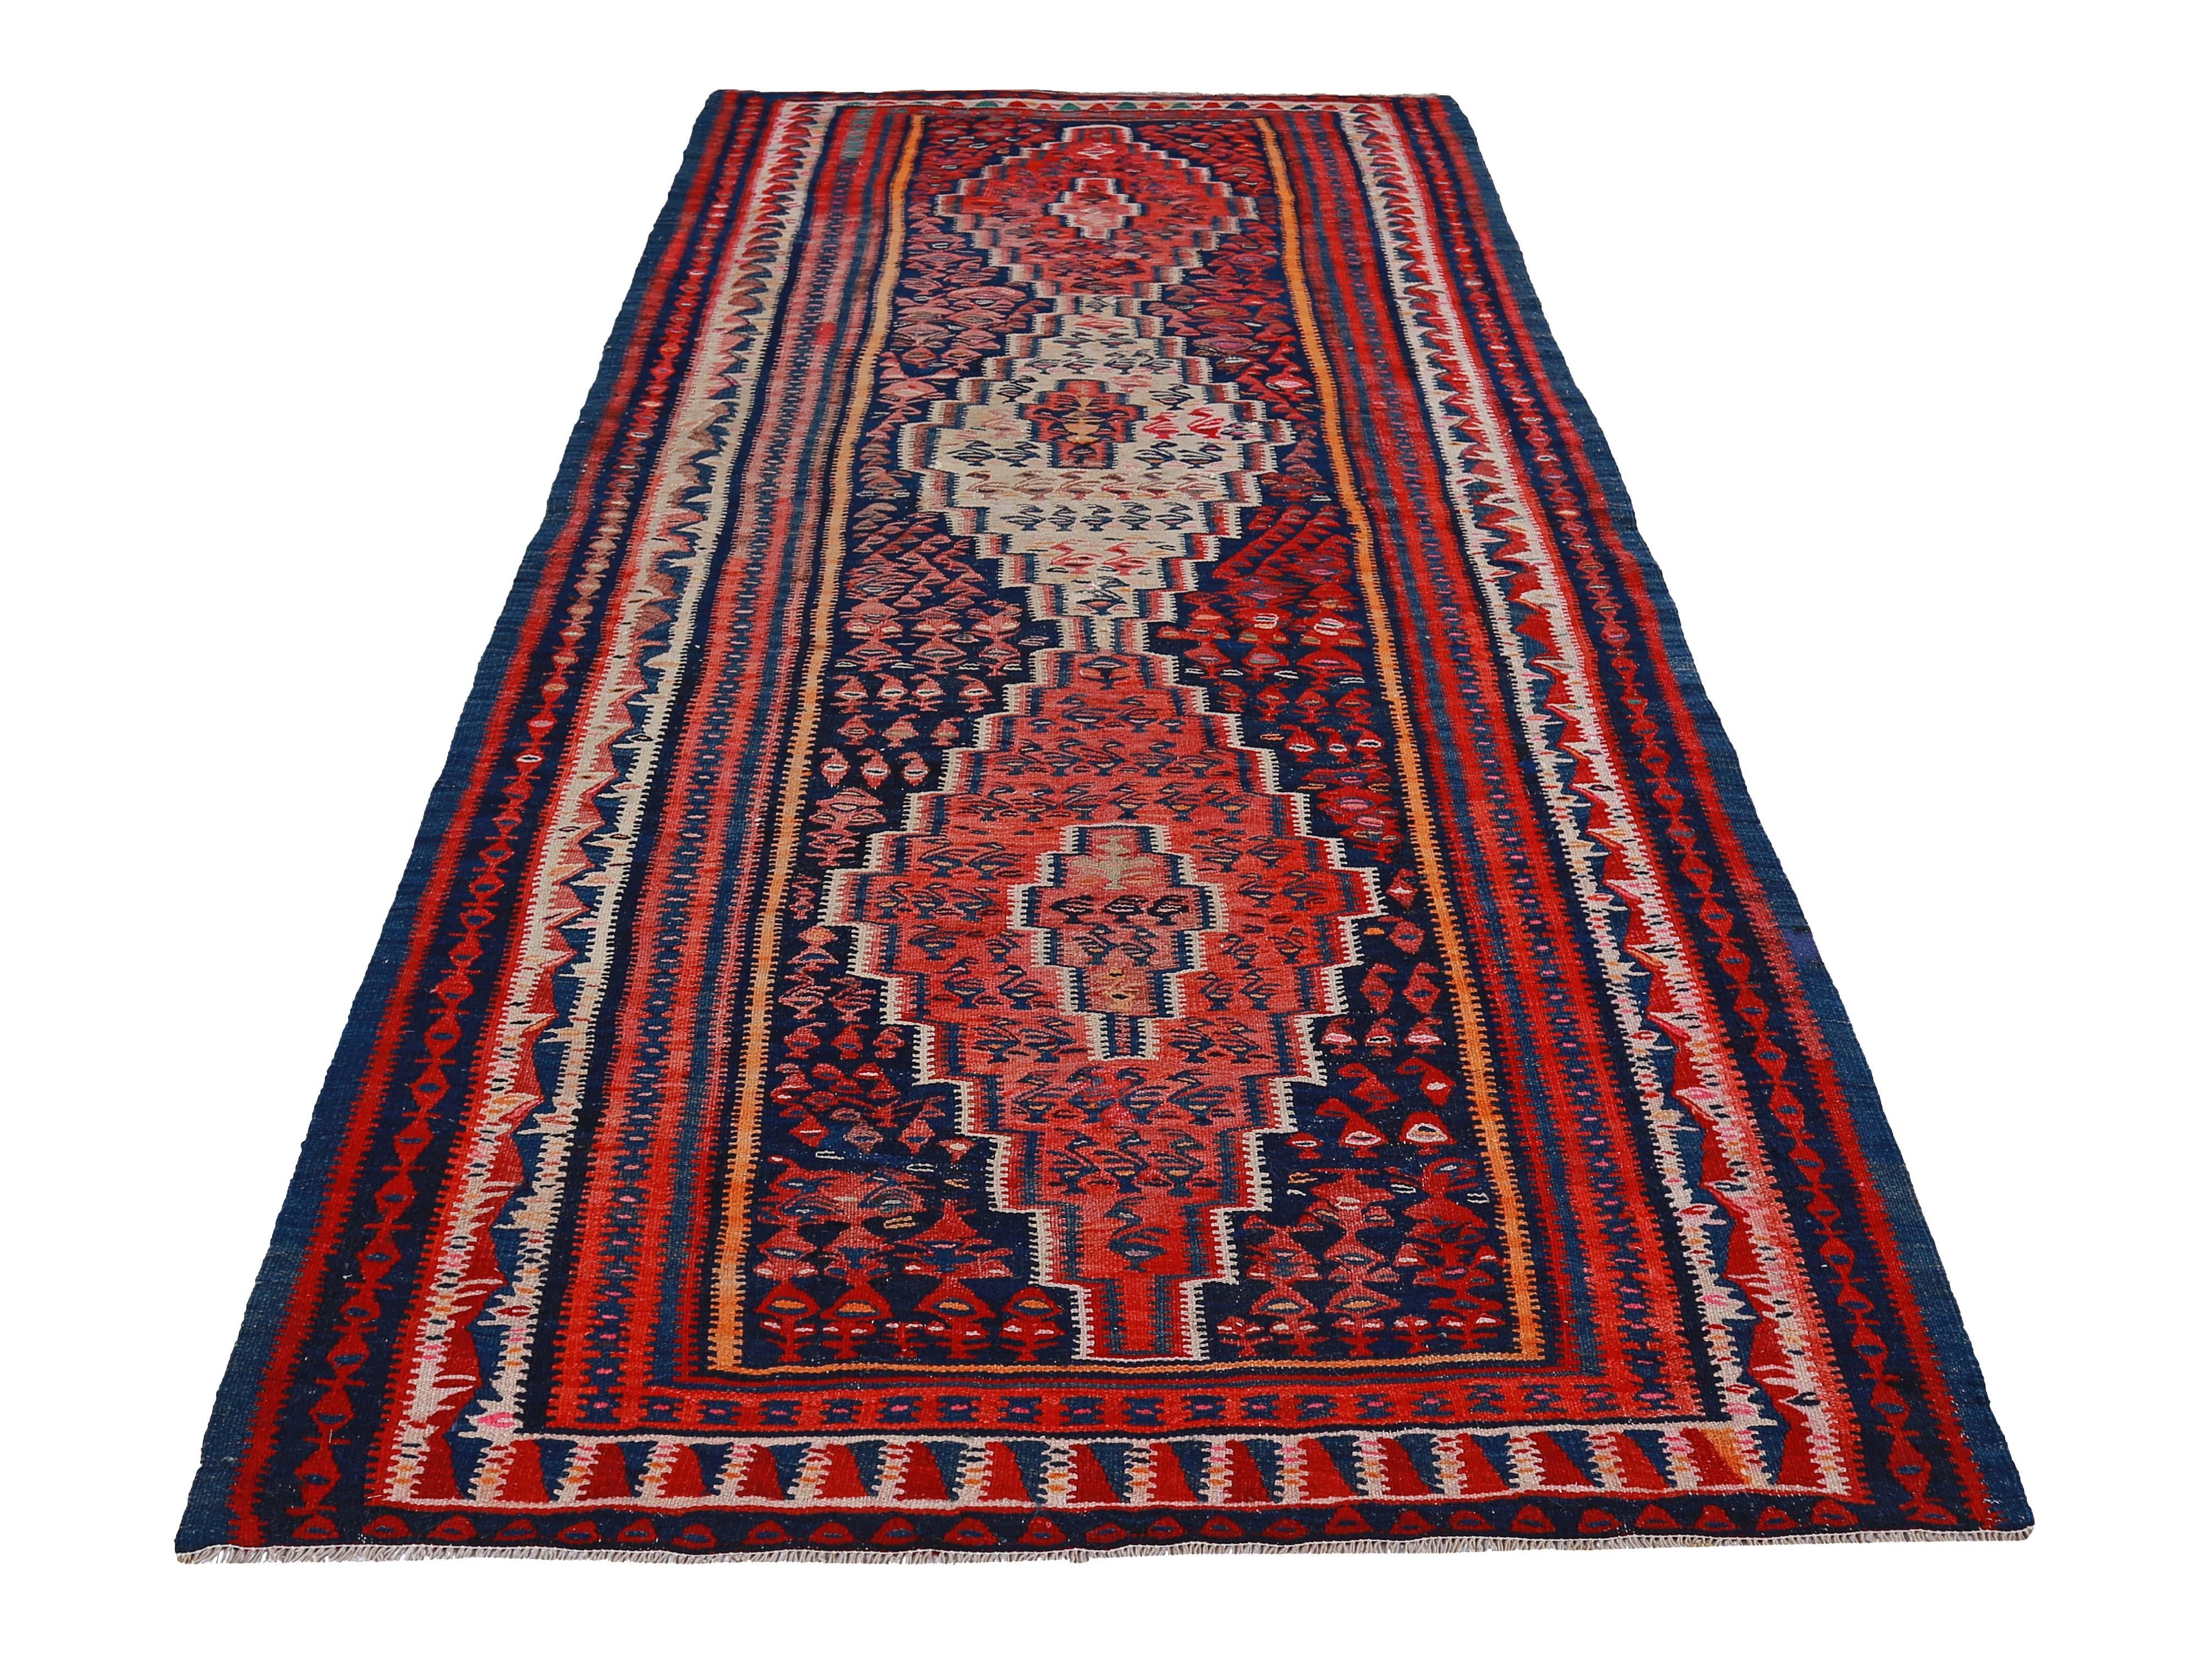 Turkish rug handwoven from the finest sheep’s wool and colored with all-natural vegetable dyes that are safe for humans and pets. It’s a traditional Kilim flat-weave design featuring red, blue and orange tribal stripes. It’s a stunning piece to get